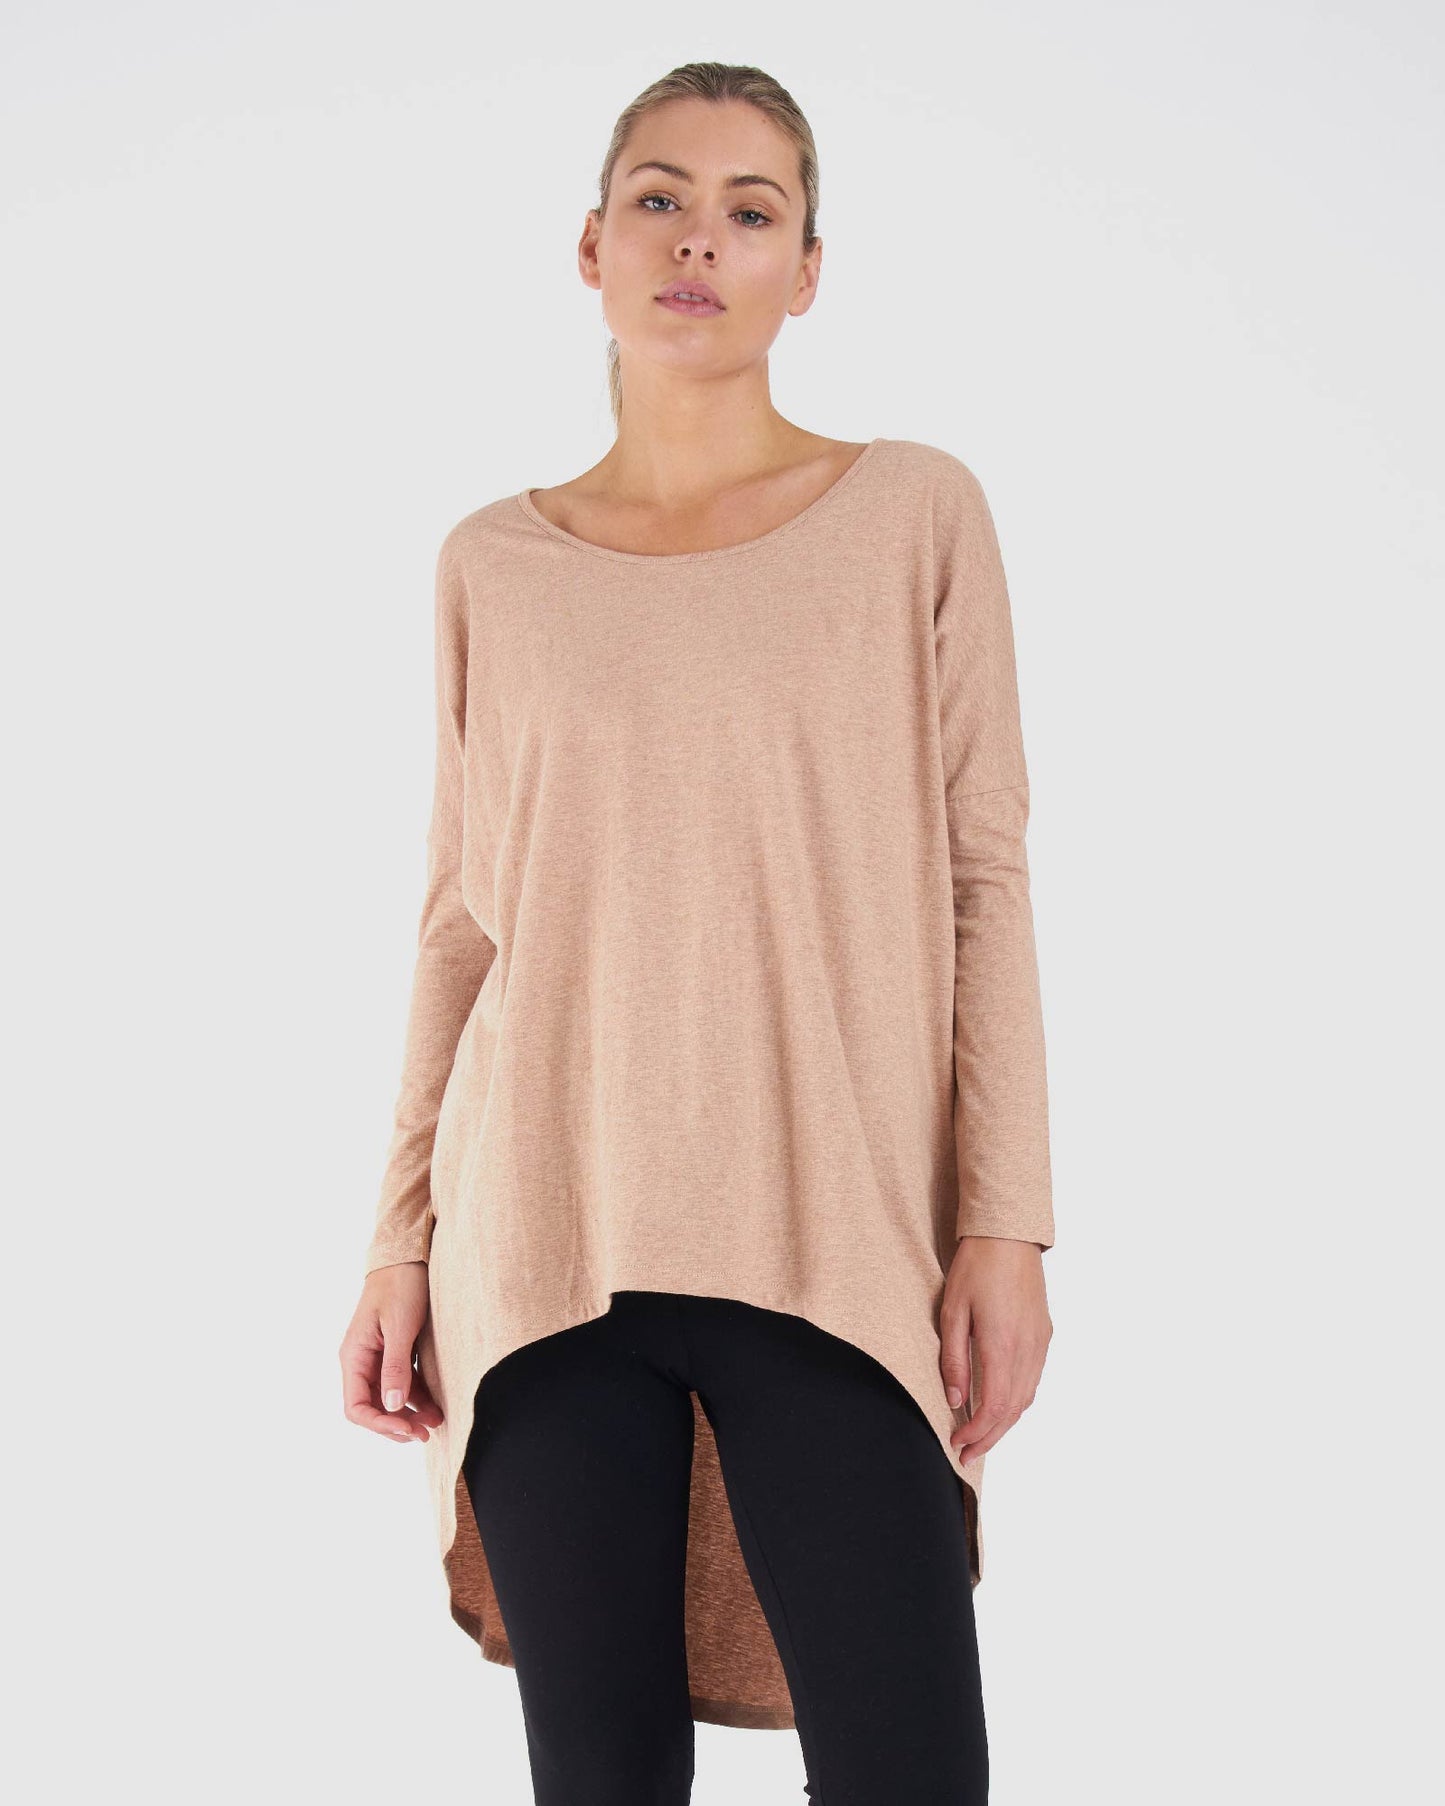 Nelly Long Sleeve Top - Sand